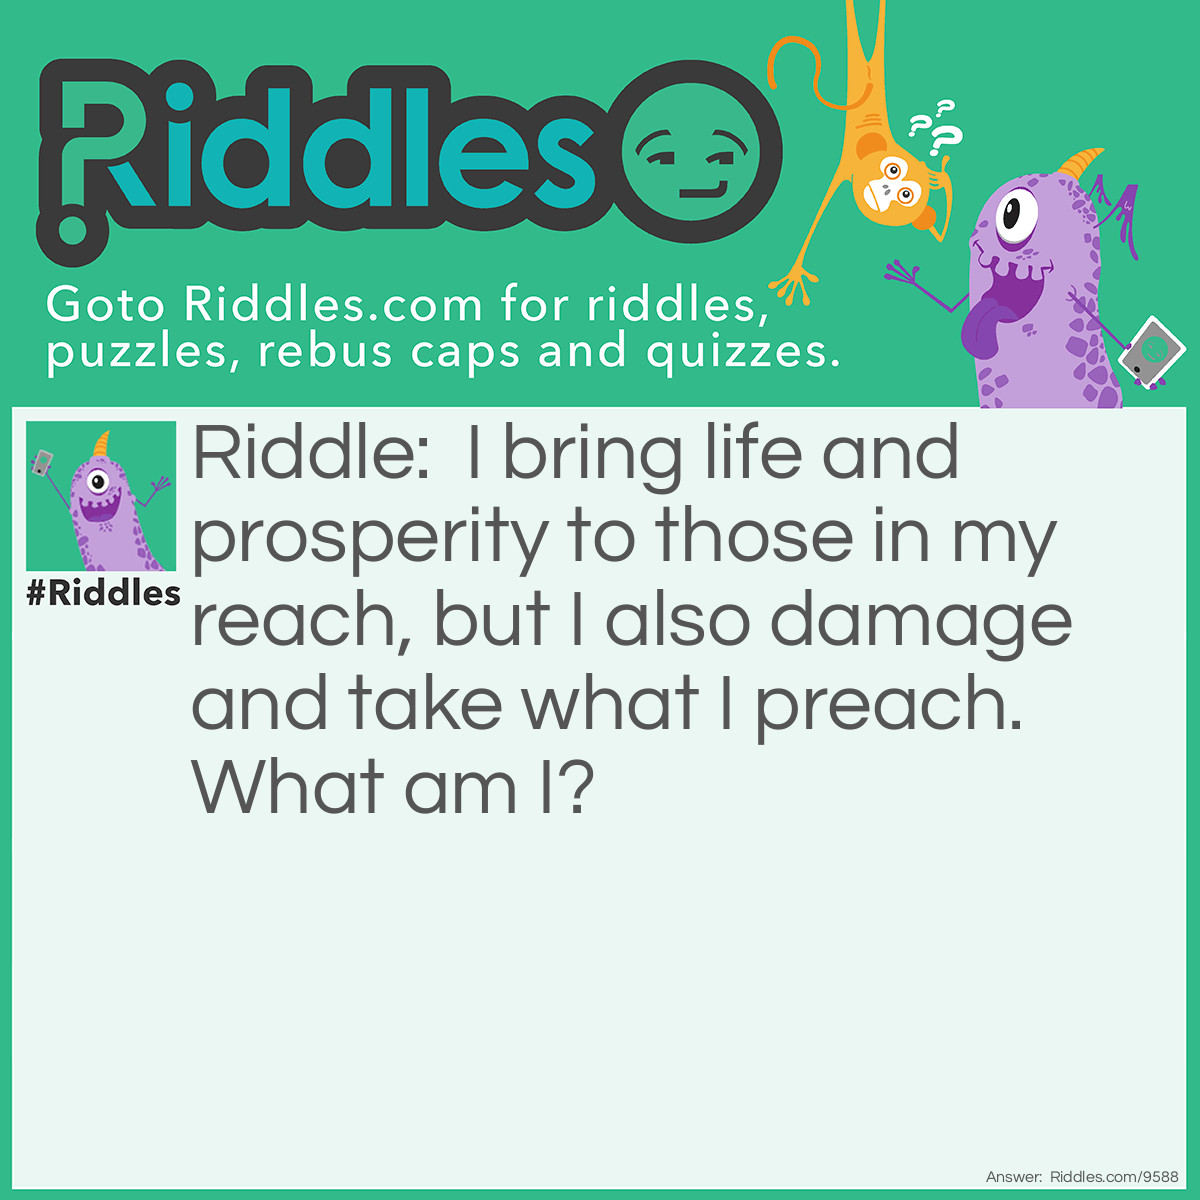 Riddle: I bring life and prosperity to those in my reach, but I also damage and take what I preach. What am I? Answer: The sun (damages sight but also gives it by providing light).